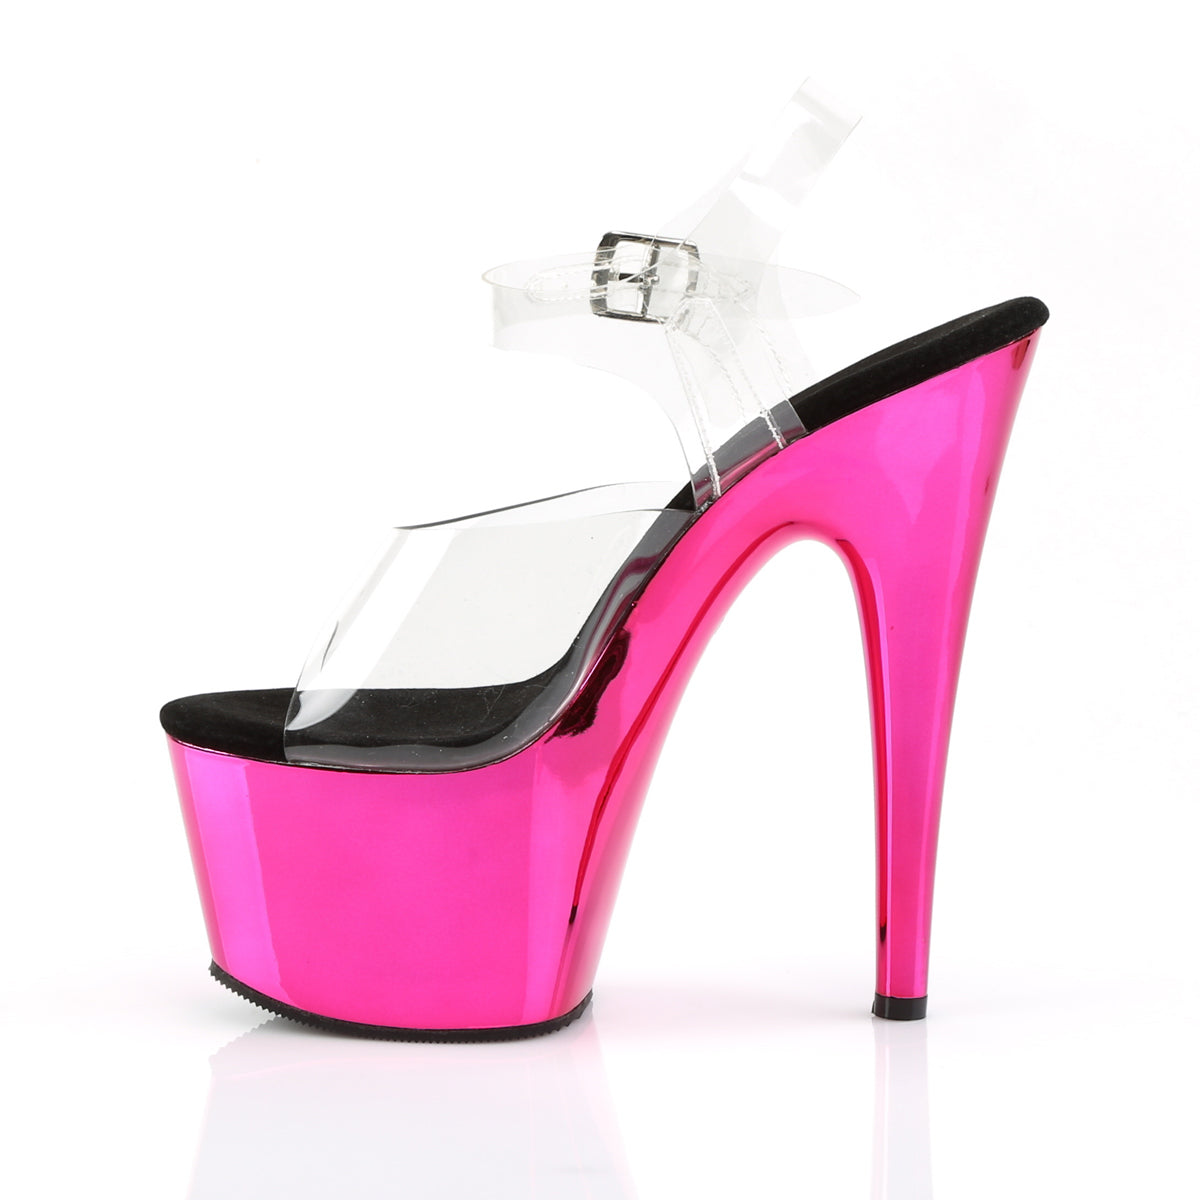 ADORE-708 7 Inch Clear & Hot Pink Chrome Pole Dancer Sandal-Pleaser- Sexy Shoes Pole Dance Heels